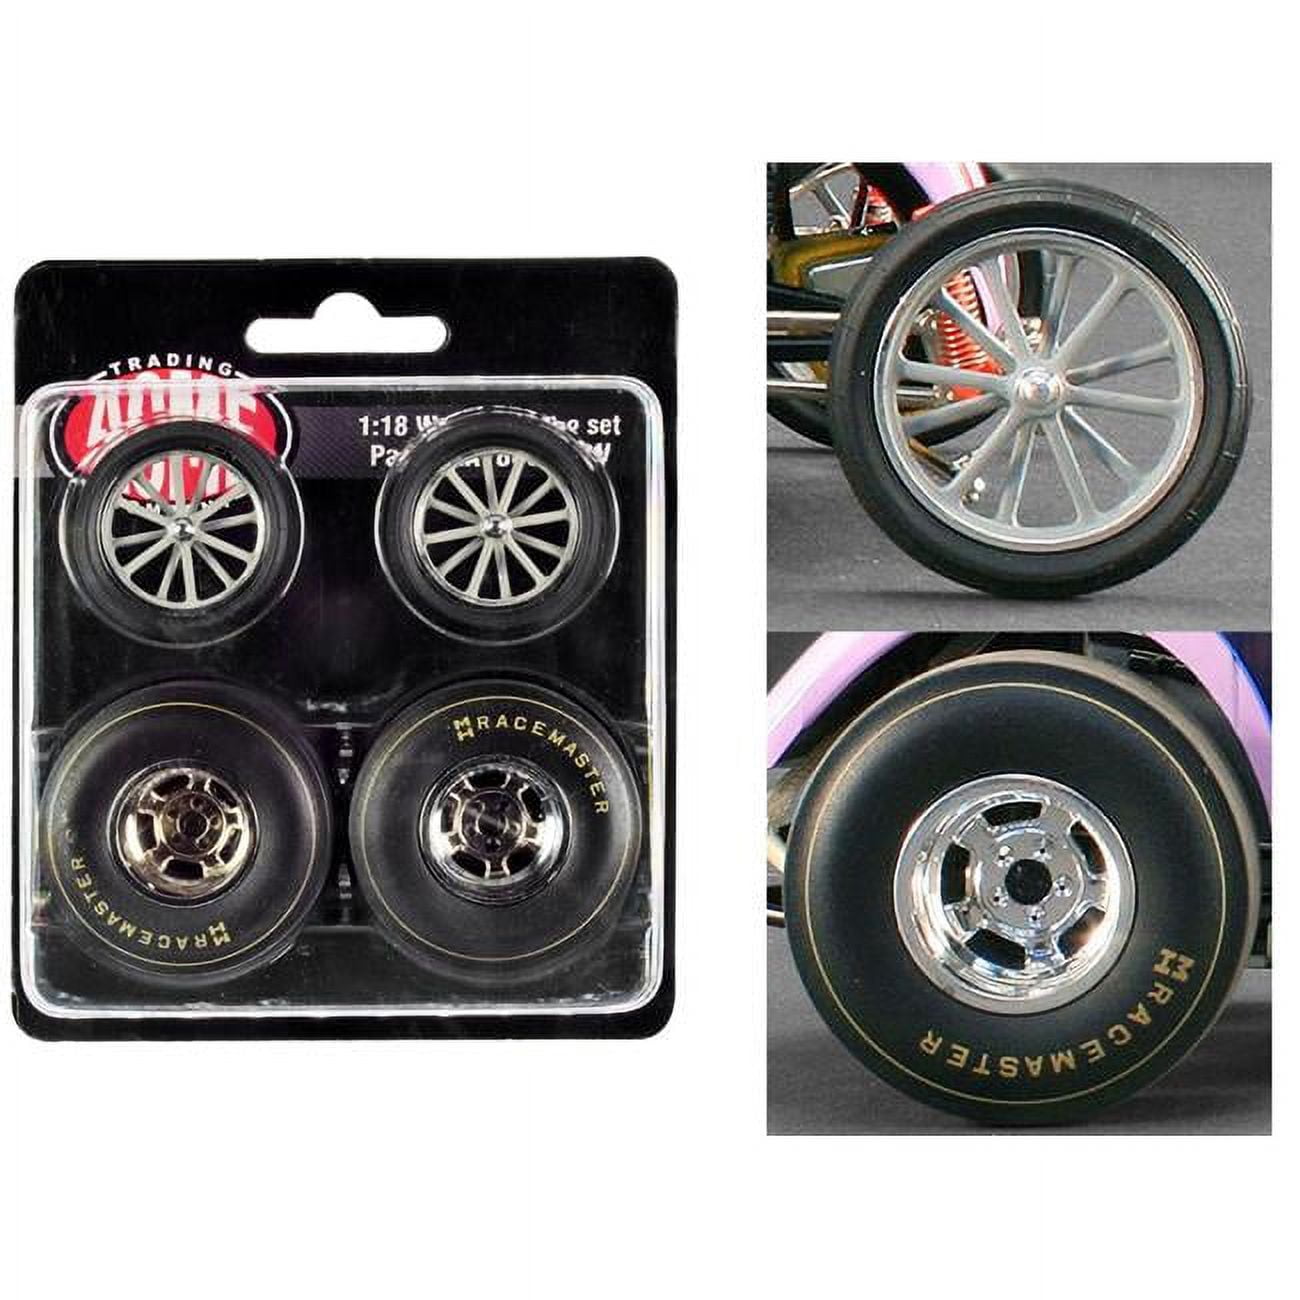 A1800815W Altered Dragster Chrome Wheels & Tires from Mondello & Mastsubara Altered Dragster for 1-18 Scale Models - Set of 4 Piece -  Acme